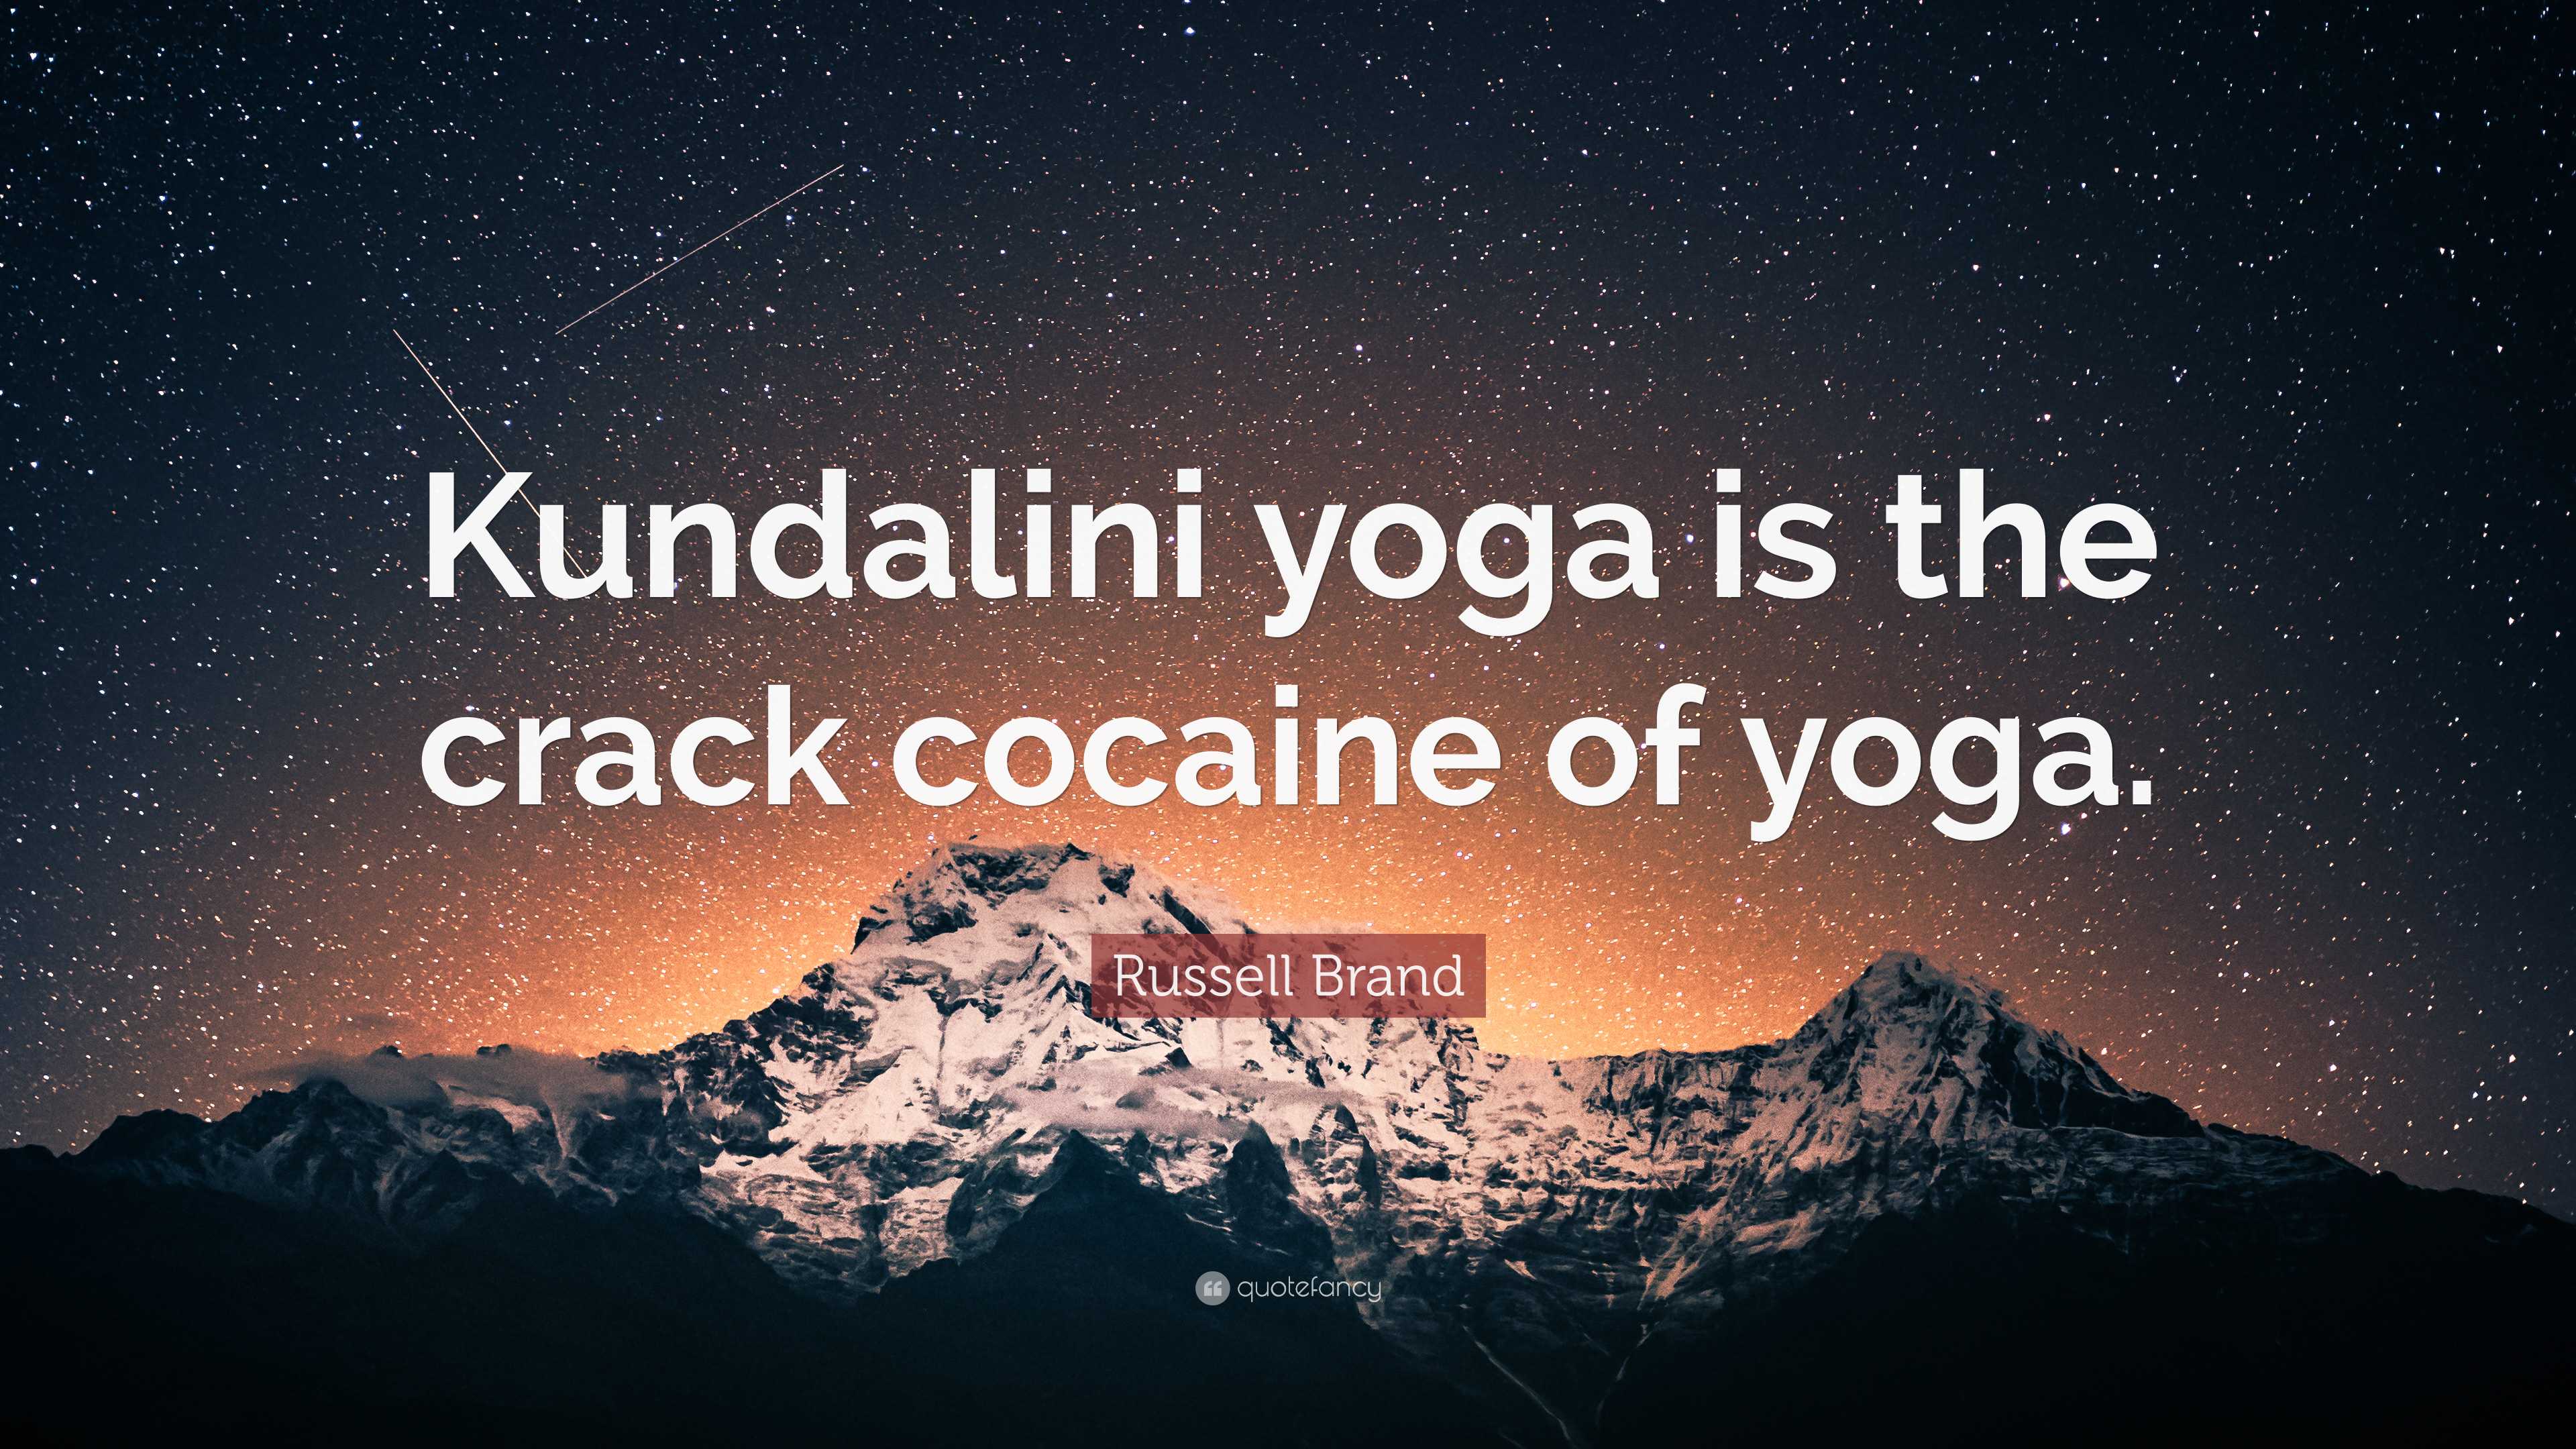 Everything We Know About Kundalini, The Controversial Yoga Practiced By  Russell Brand